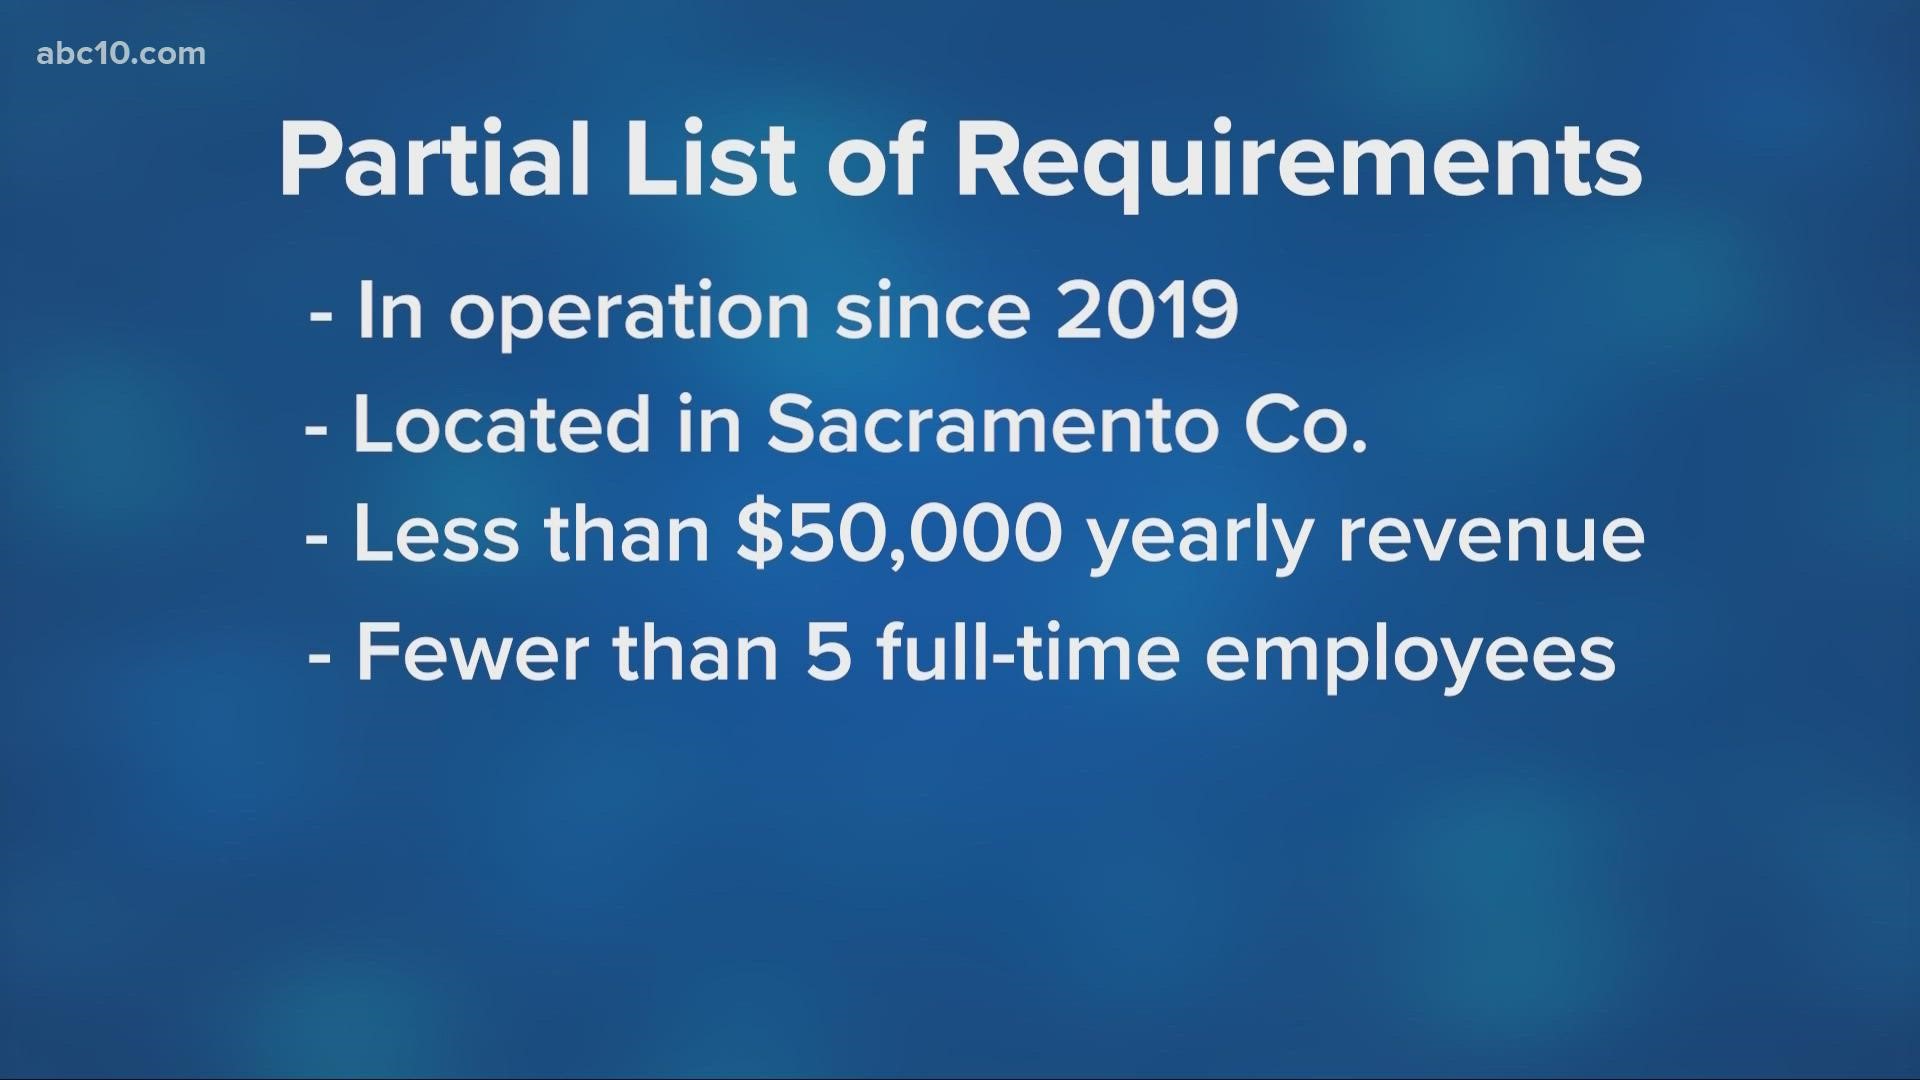 The county is offering $2,500 in micro-business grants that do not have to be paid back, applications officially open today for businesses open since 2019 or before.